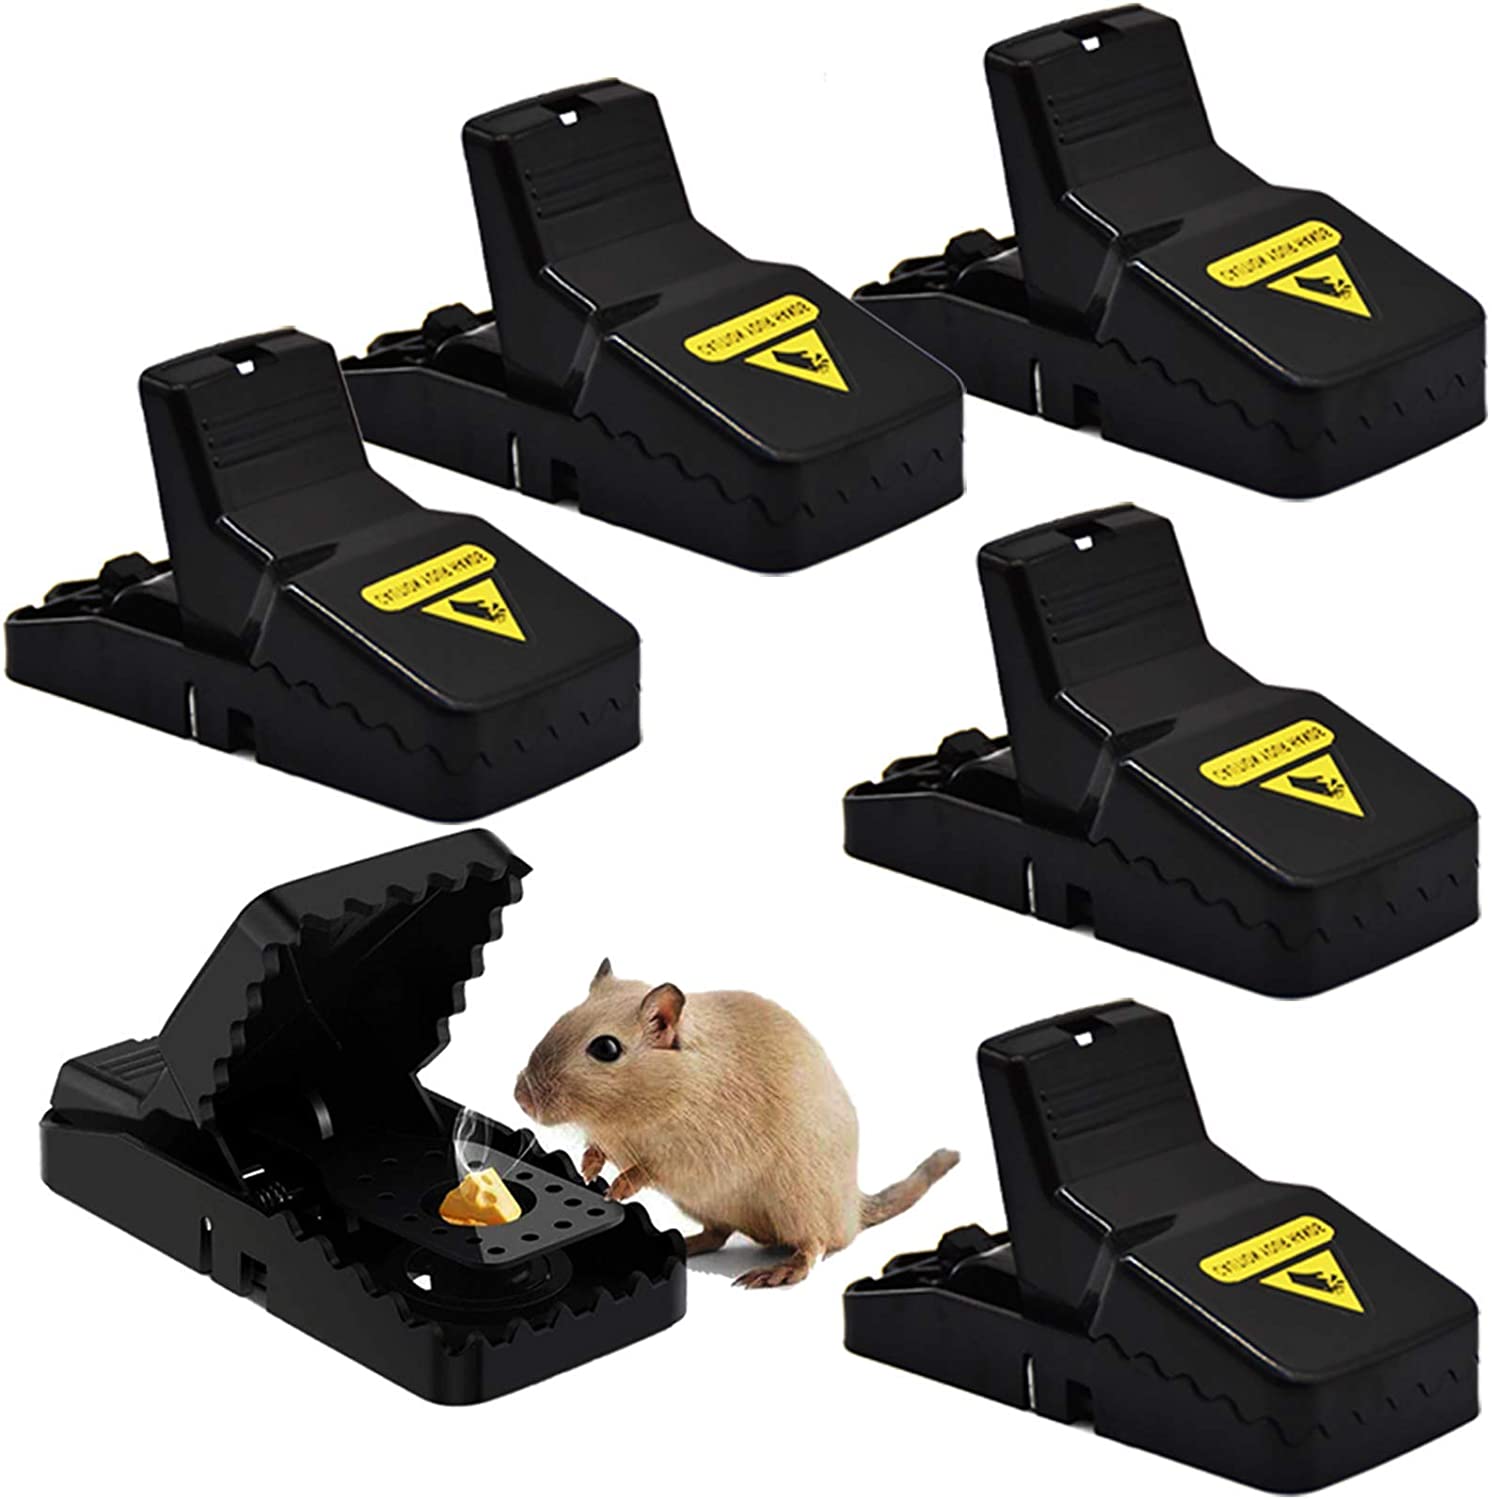 JT Eaton JAWZ Pro Series Small Covered Animal Trap For Mice Pk Ace Hardware  | Sl Reusable Mouse Traps 